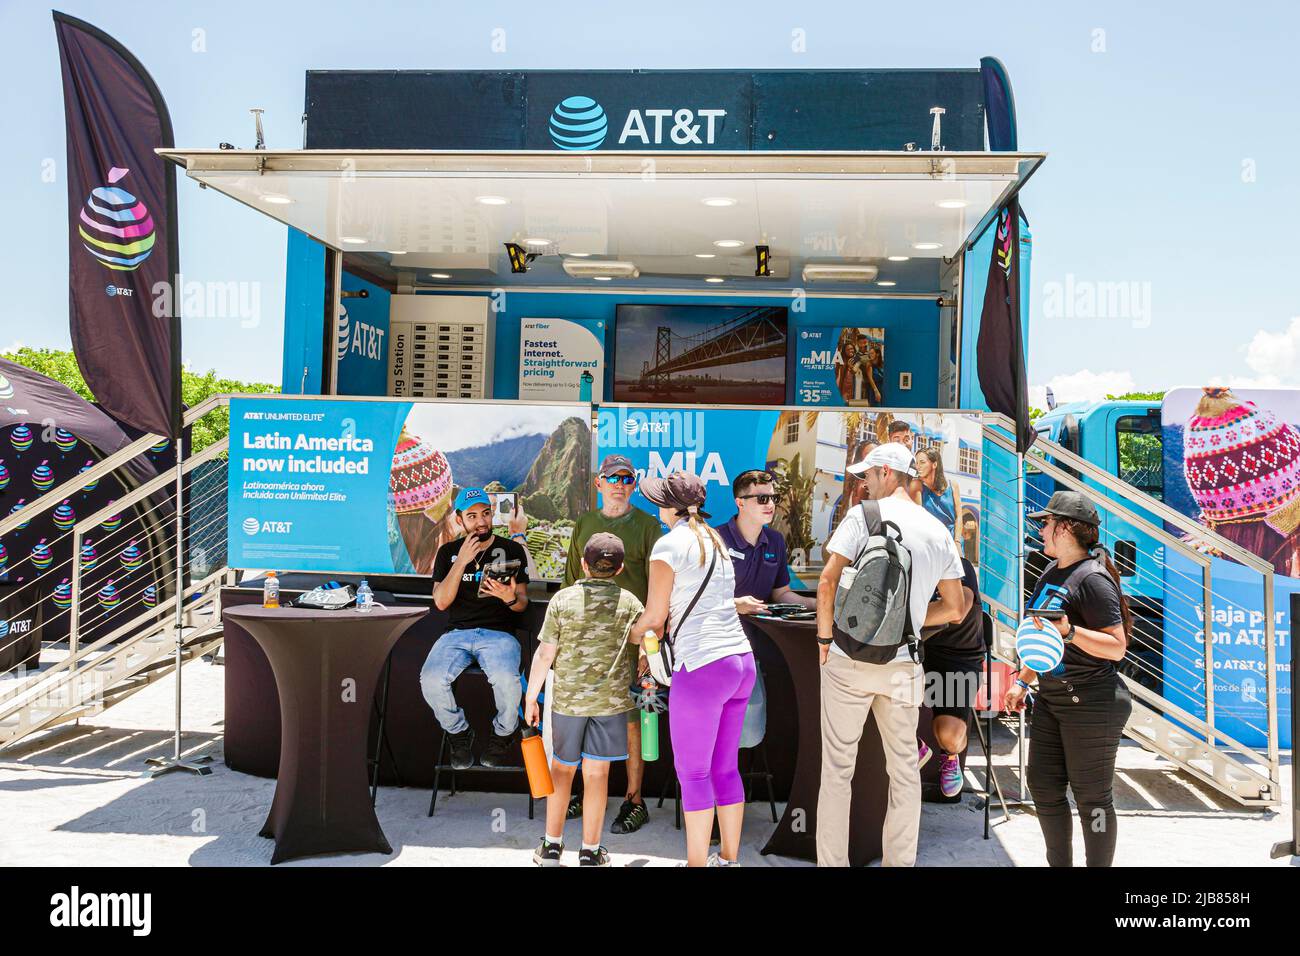 Miami Beach Florida,Hyundai Air & Sea Show Military Village vendor vendors,exhibitor exhibitors stall stalls booth booths,AT&T promotion promoting cor Stock Photo